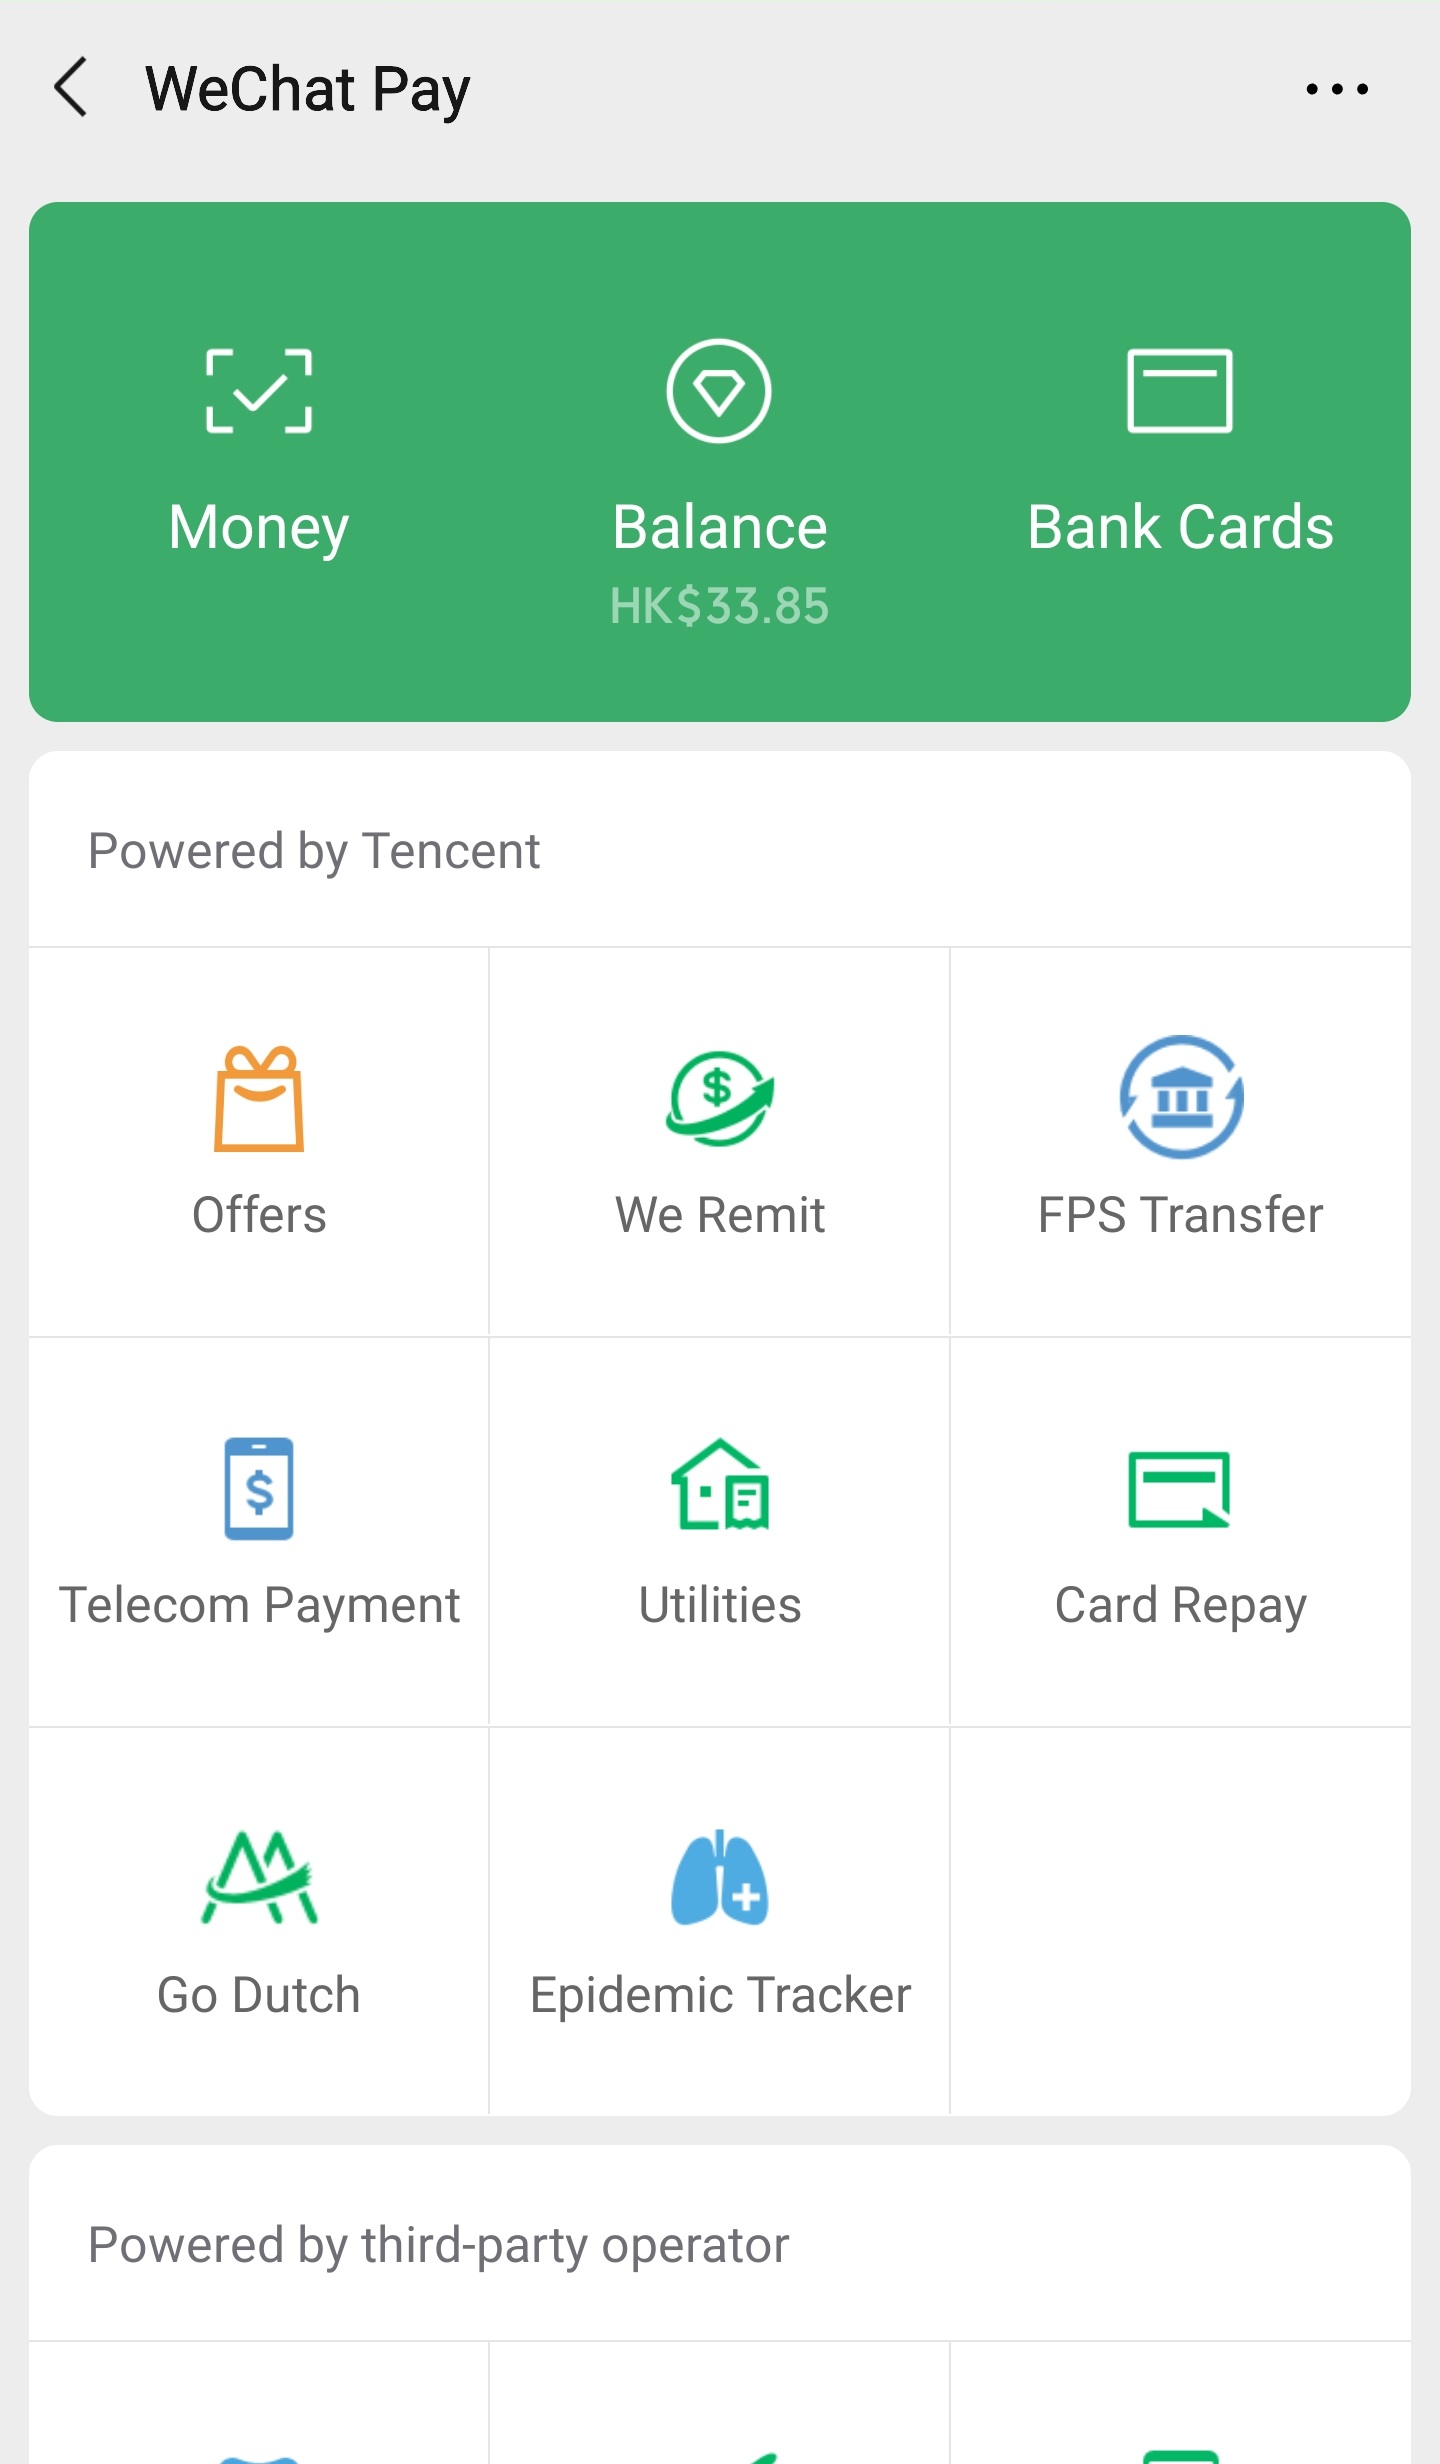 Tap “Bank Cards” on WeChat Pay